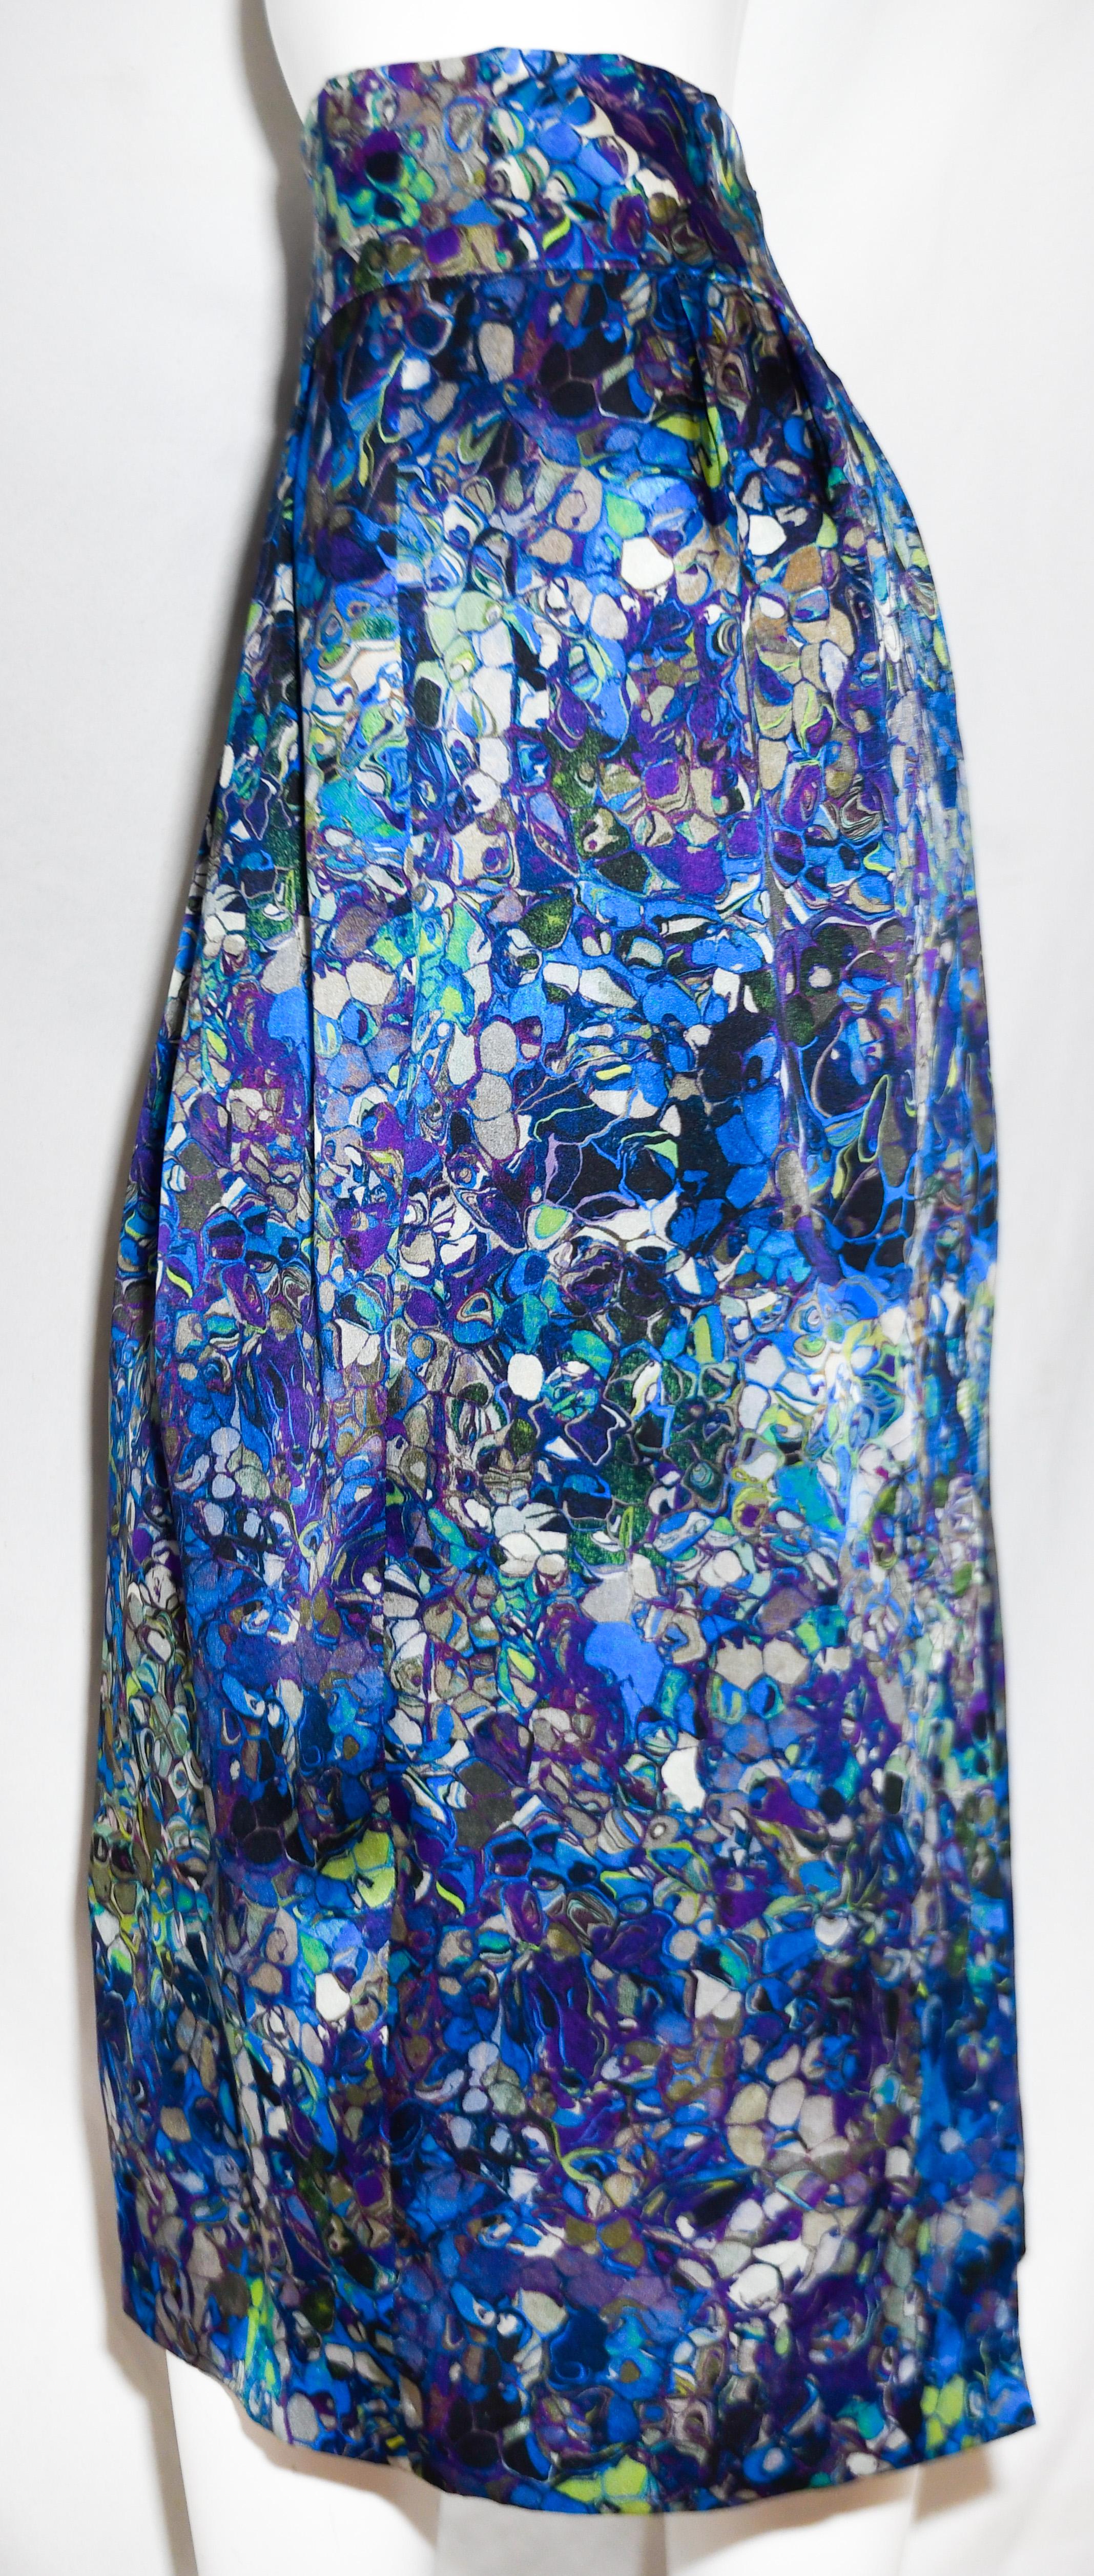 Dries Van Noten 1990's multi color silk abstract print pleated detailed midi skirt includes a high rise 2 1/2 inch waistband and zipper at back for closure.  This skirt falls to just below the knee.   Skirt is in excellent condition.
Made in Belgium